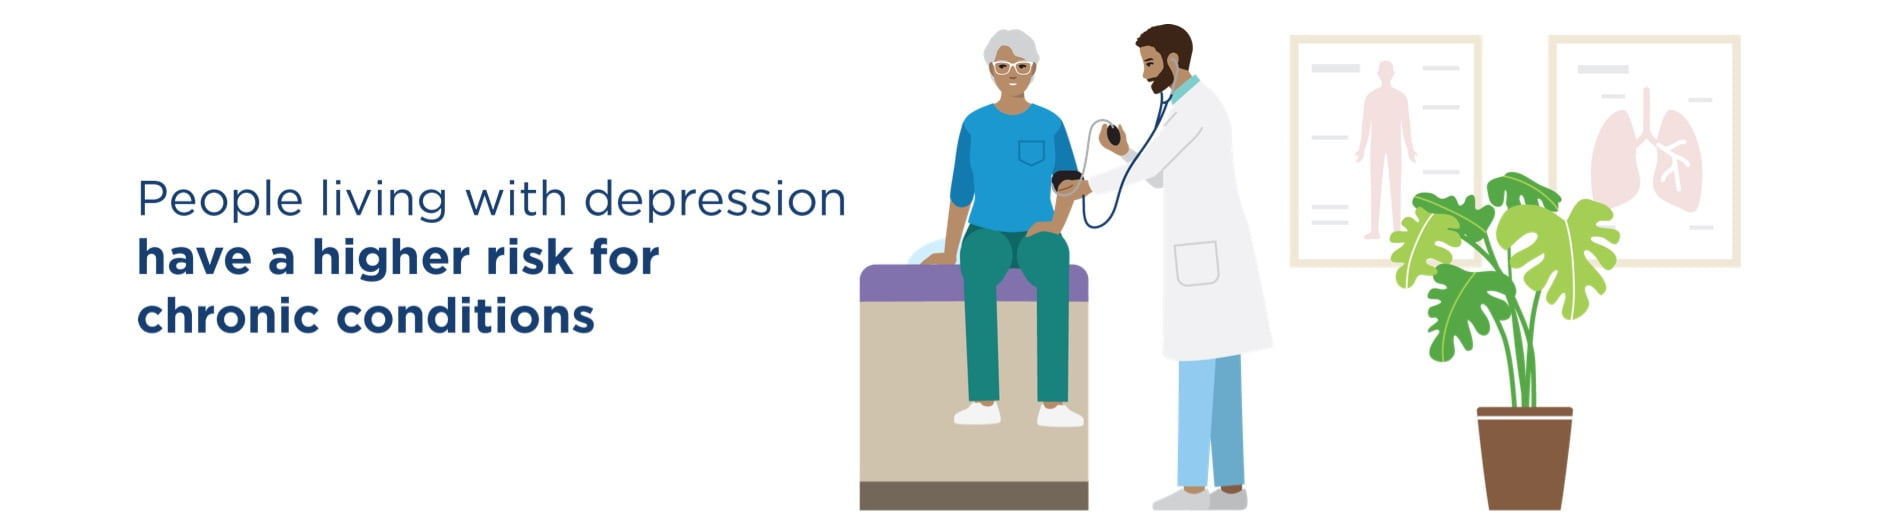 Illustration of an older person having their blood pressure tested in a doctor's office with caption: People living with depression have a higher risk for chronic conditions